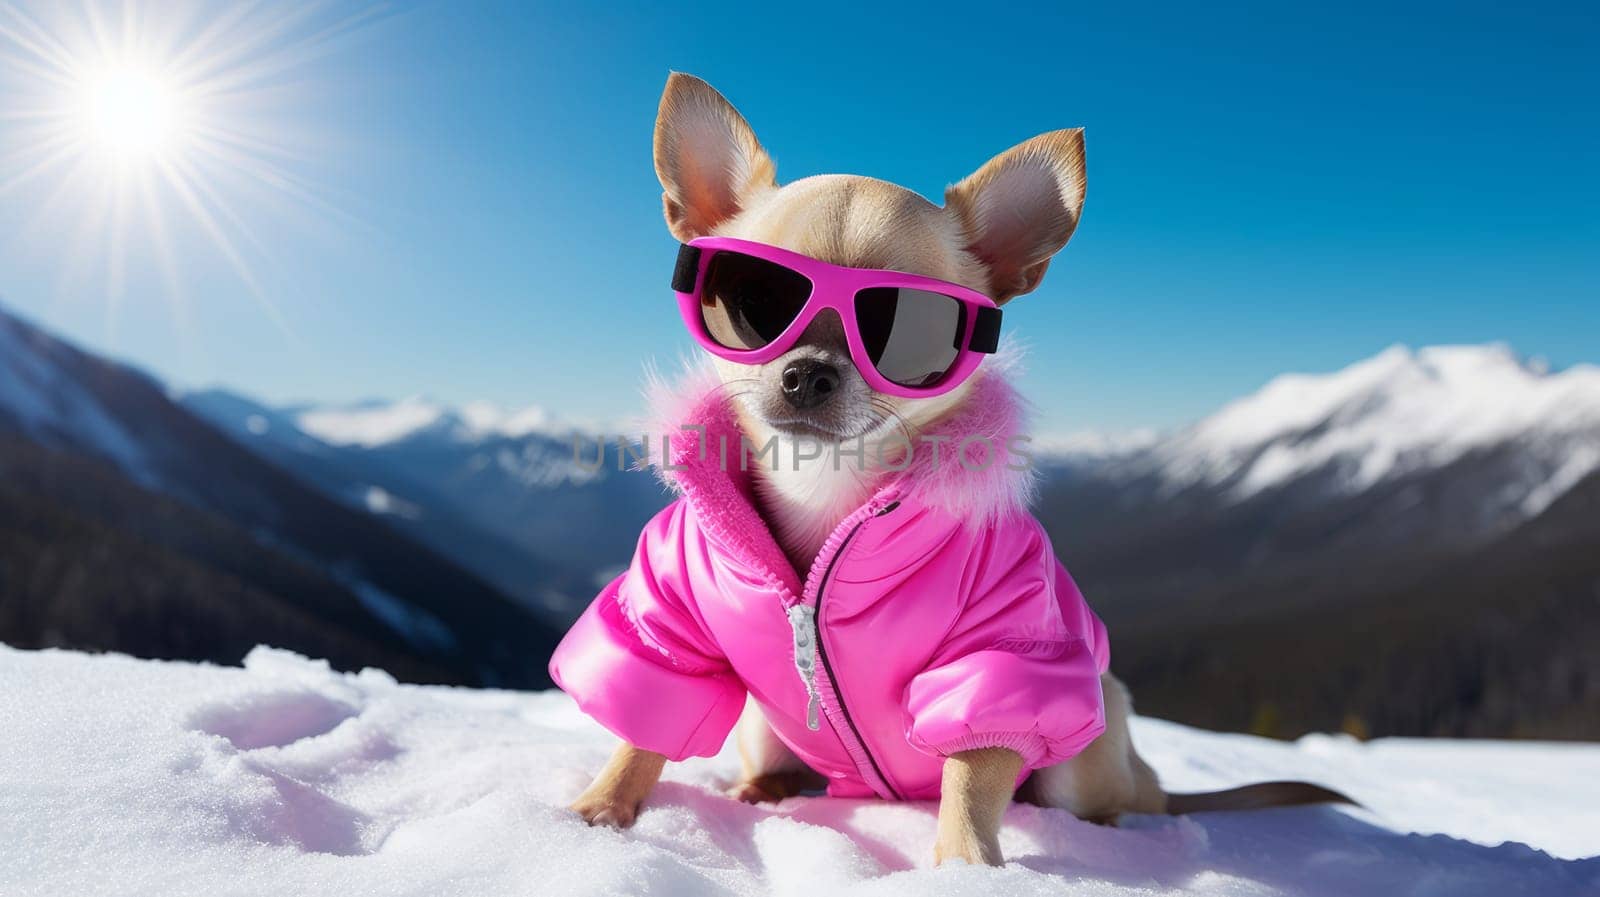 A happy, active, small, cheerful dog in a pink jacket and glasses runs through the snow overlooking a snowy landscape of a forest and mountains, at a ski resort. by Alla_Yurtayeva